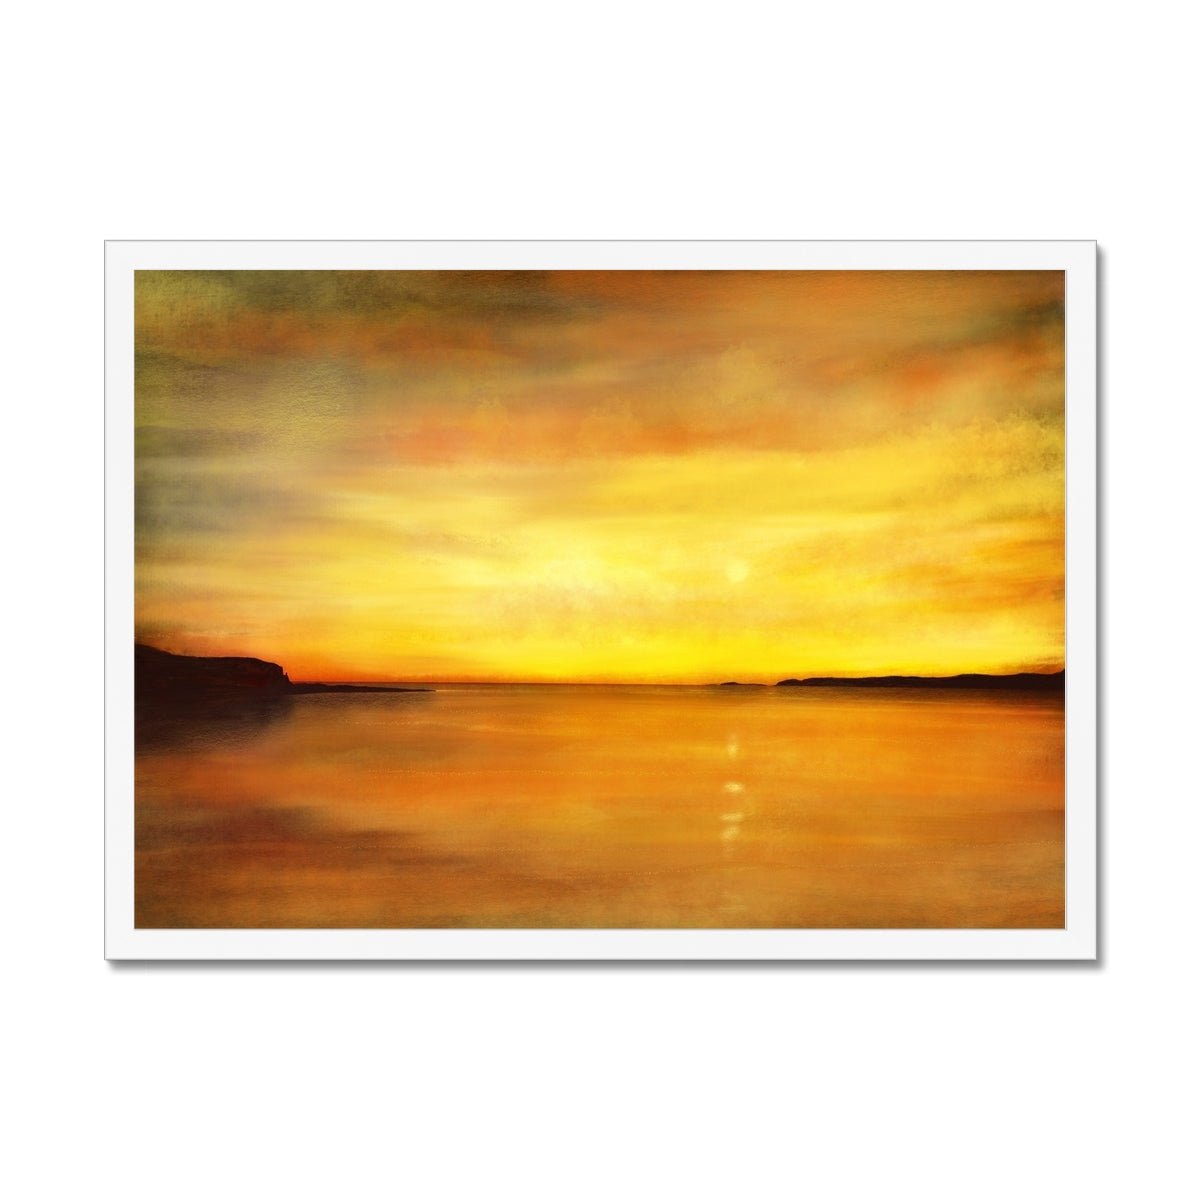 King's Cave Sunset Arran Painting | Framed Prints From Scotland-Framed Prints-Arran Art Gallery-A2 Landscape-White Frame-Paintings, Prints, Homeware, Art Gifts From Scotland By Scottish Artist Kevin Hunter